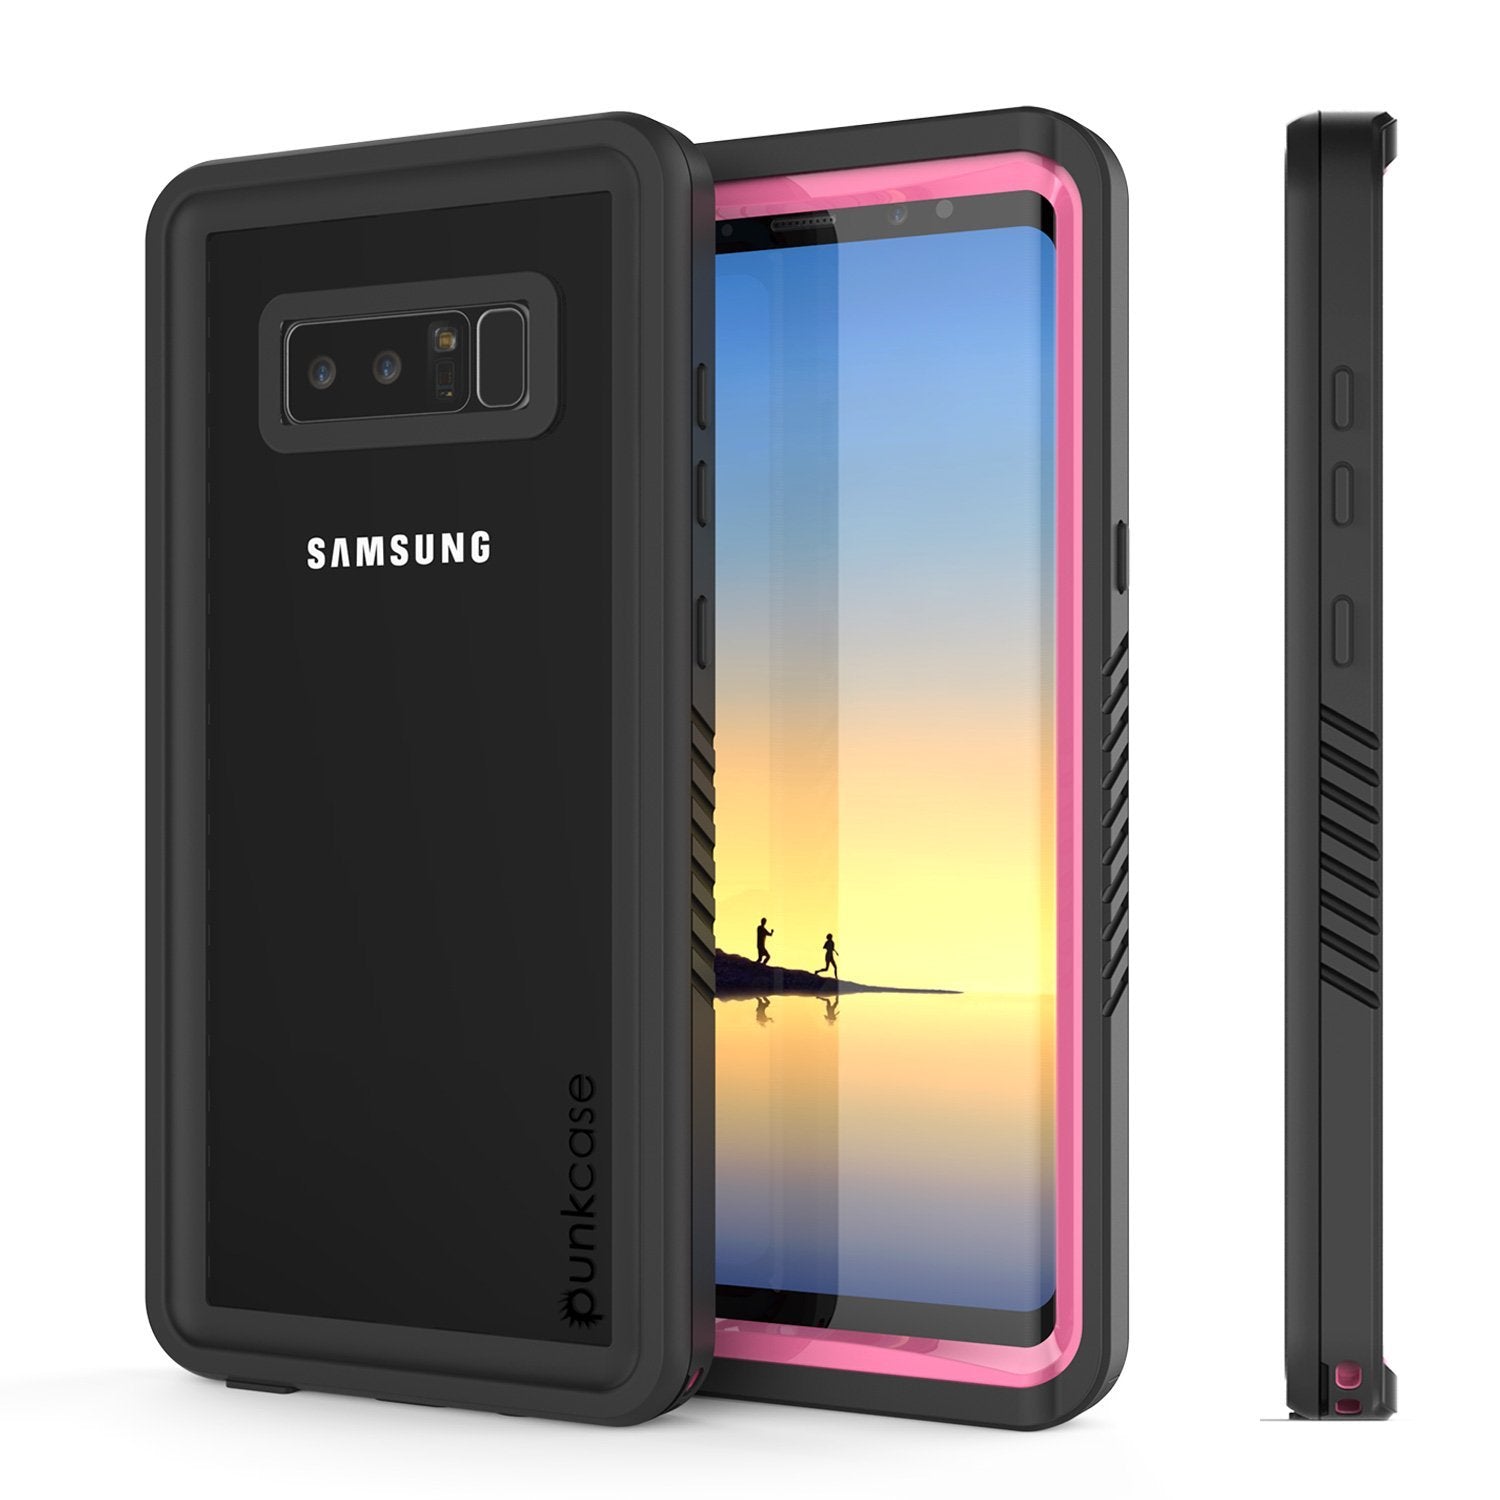 Galaxy Note 8 Case Punkcase Extreme Series Pink Shockproof Armor Cover